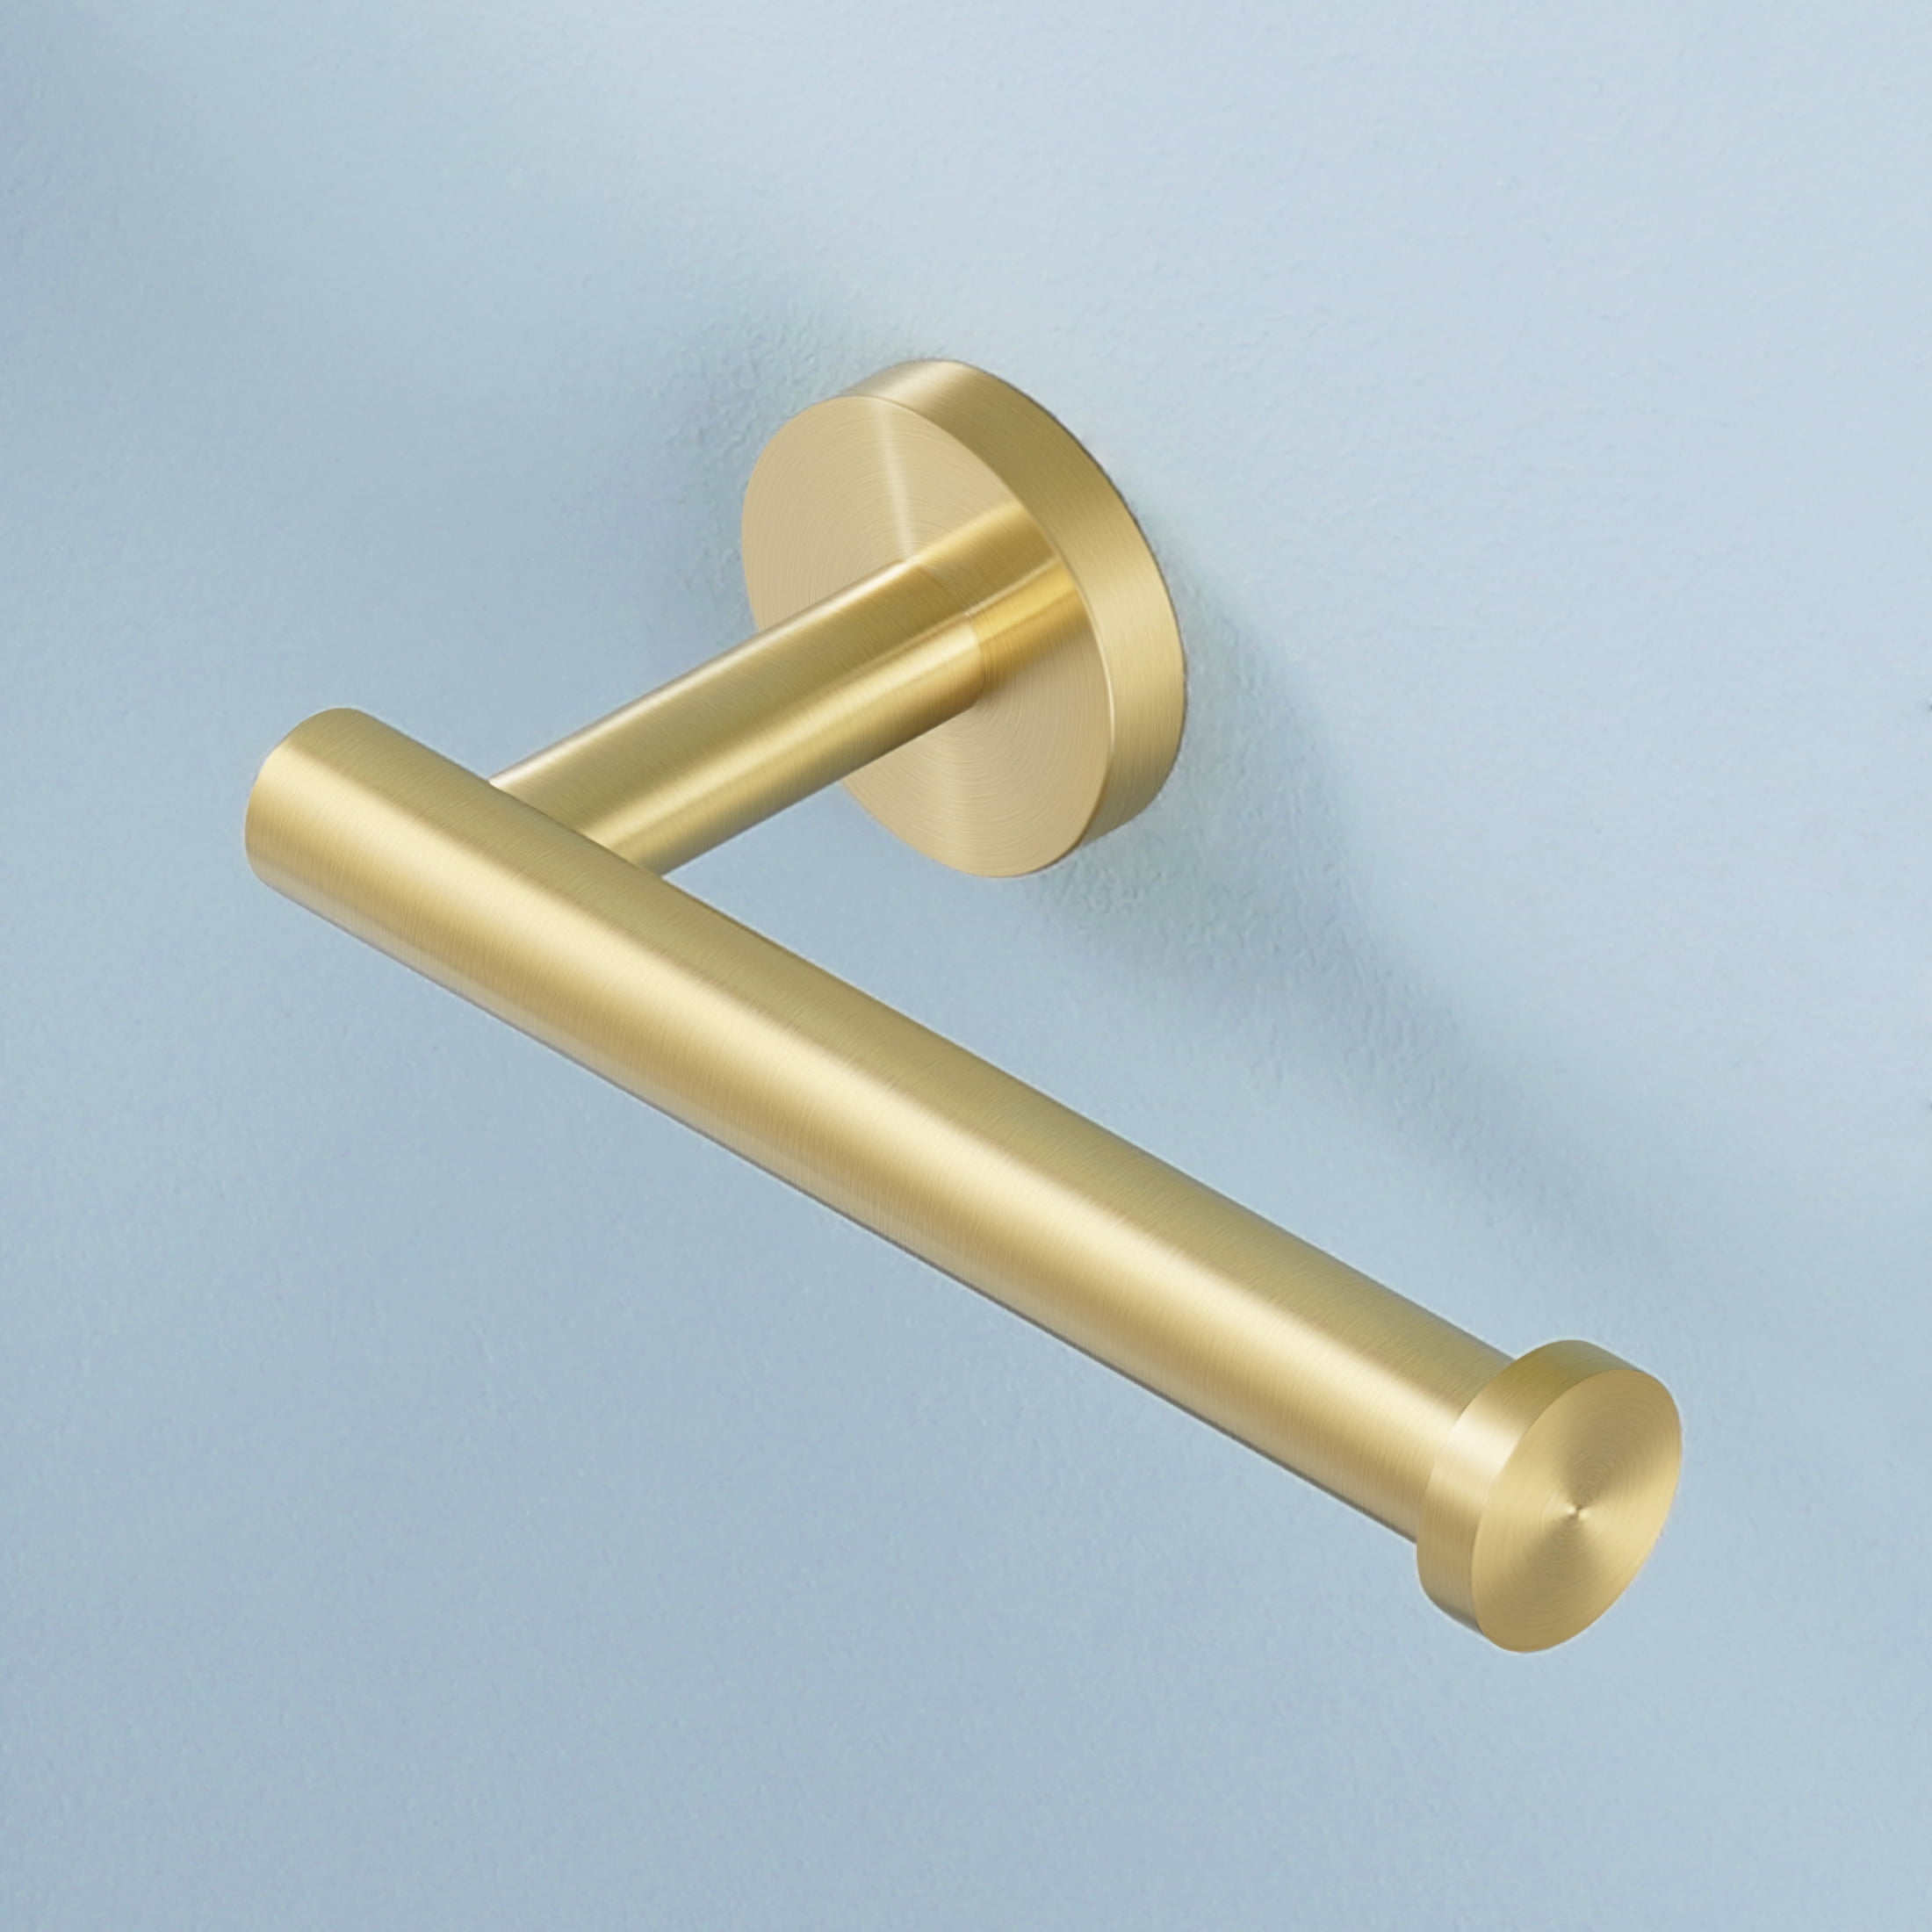 Tileon Stainless Steel Wall-Mount Single Post Toilet Paper Holder in Brushed Gold